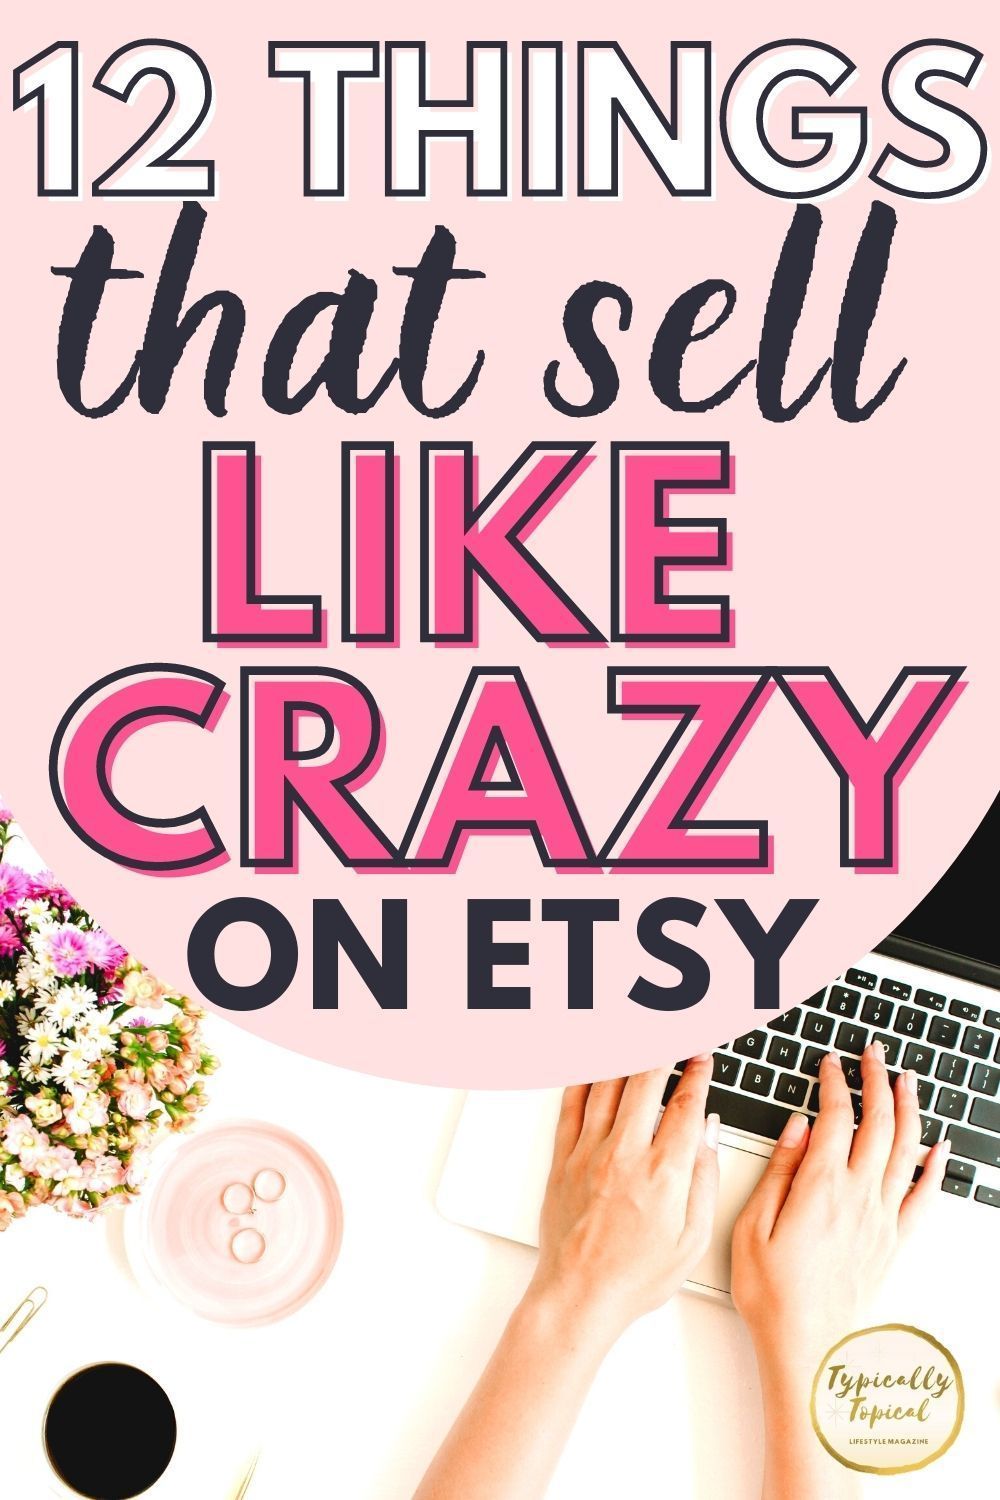 12 EASY THINGS TO MAKE AND SELL FOR EXTRA CASH ONLINE THINGS THAT SELL WELL ON ETSY